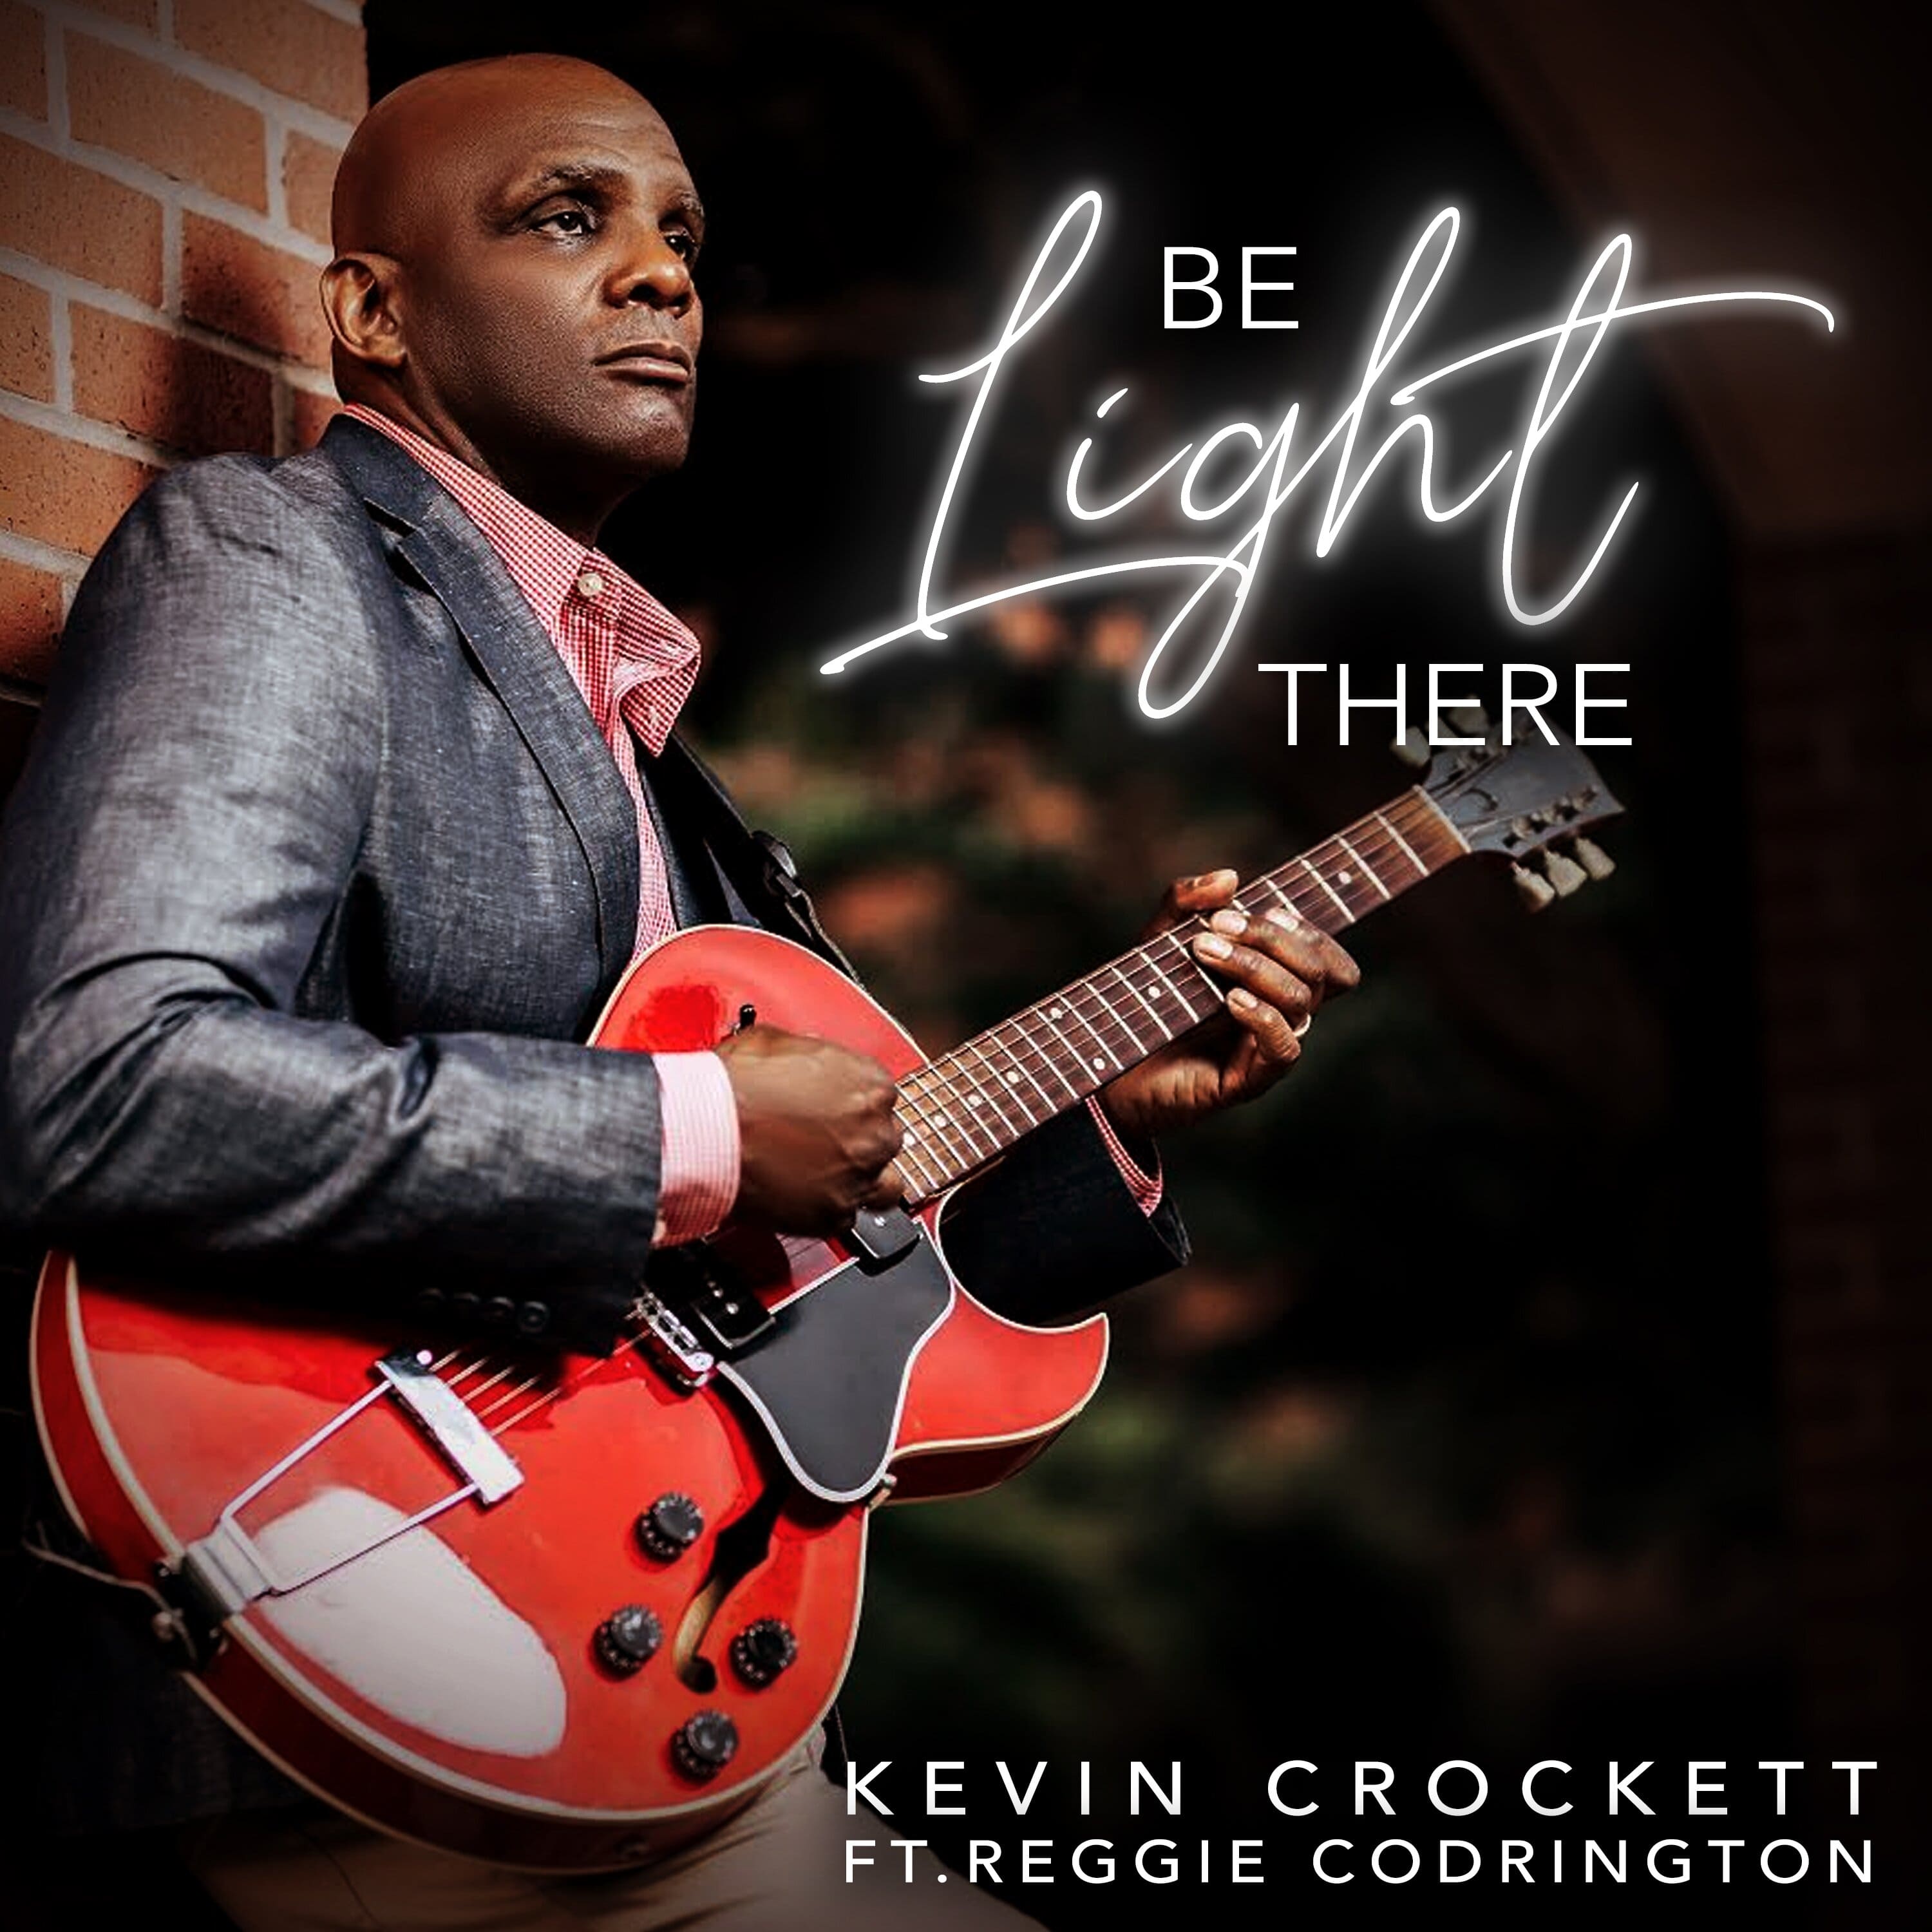 Kevin Crockett Be Light There cover art